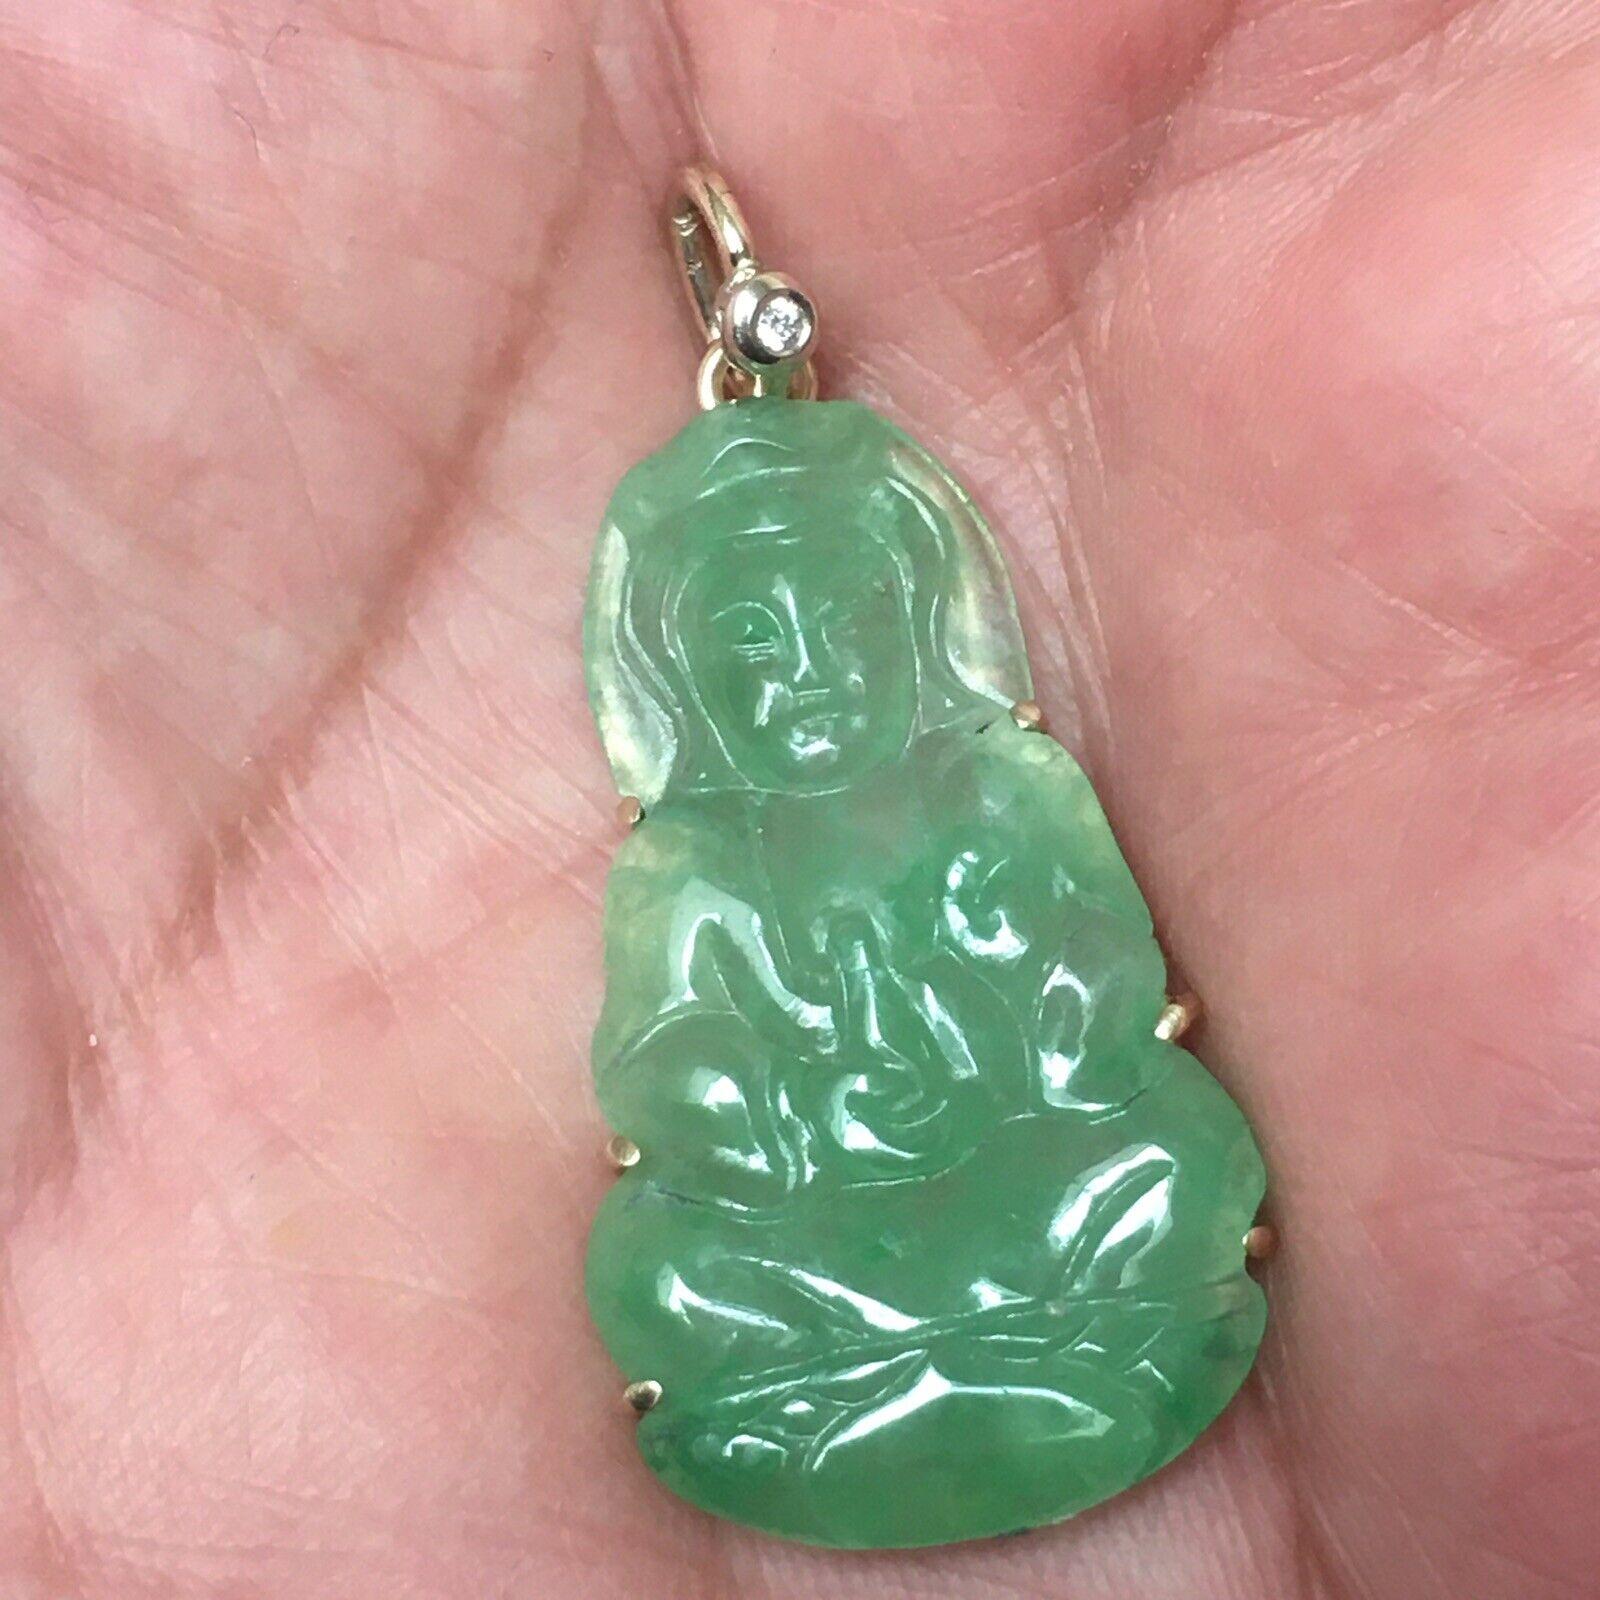 jade necklace meaning